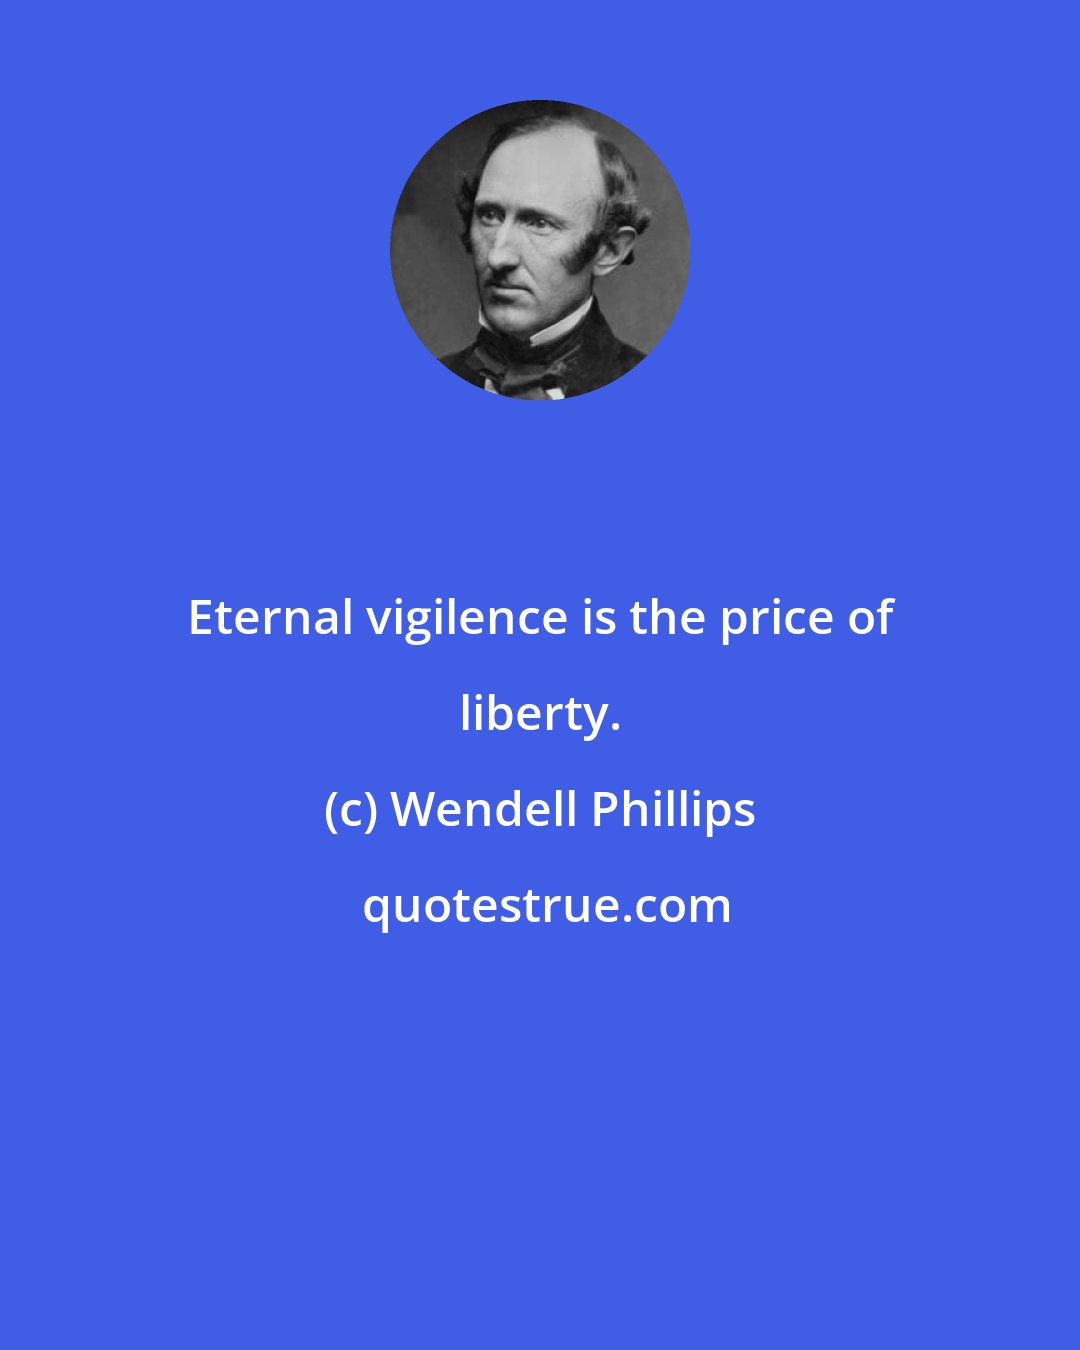 Wendell Phillips: Eternal vigilence is the price of liberty.